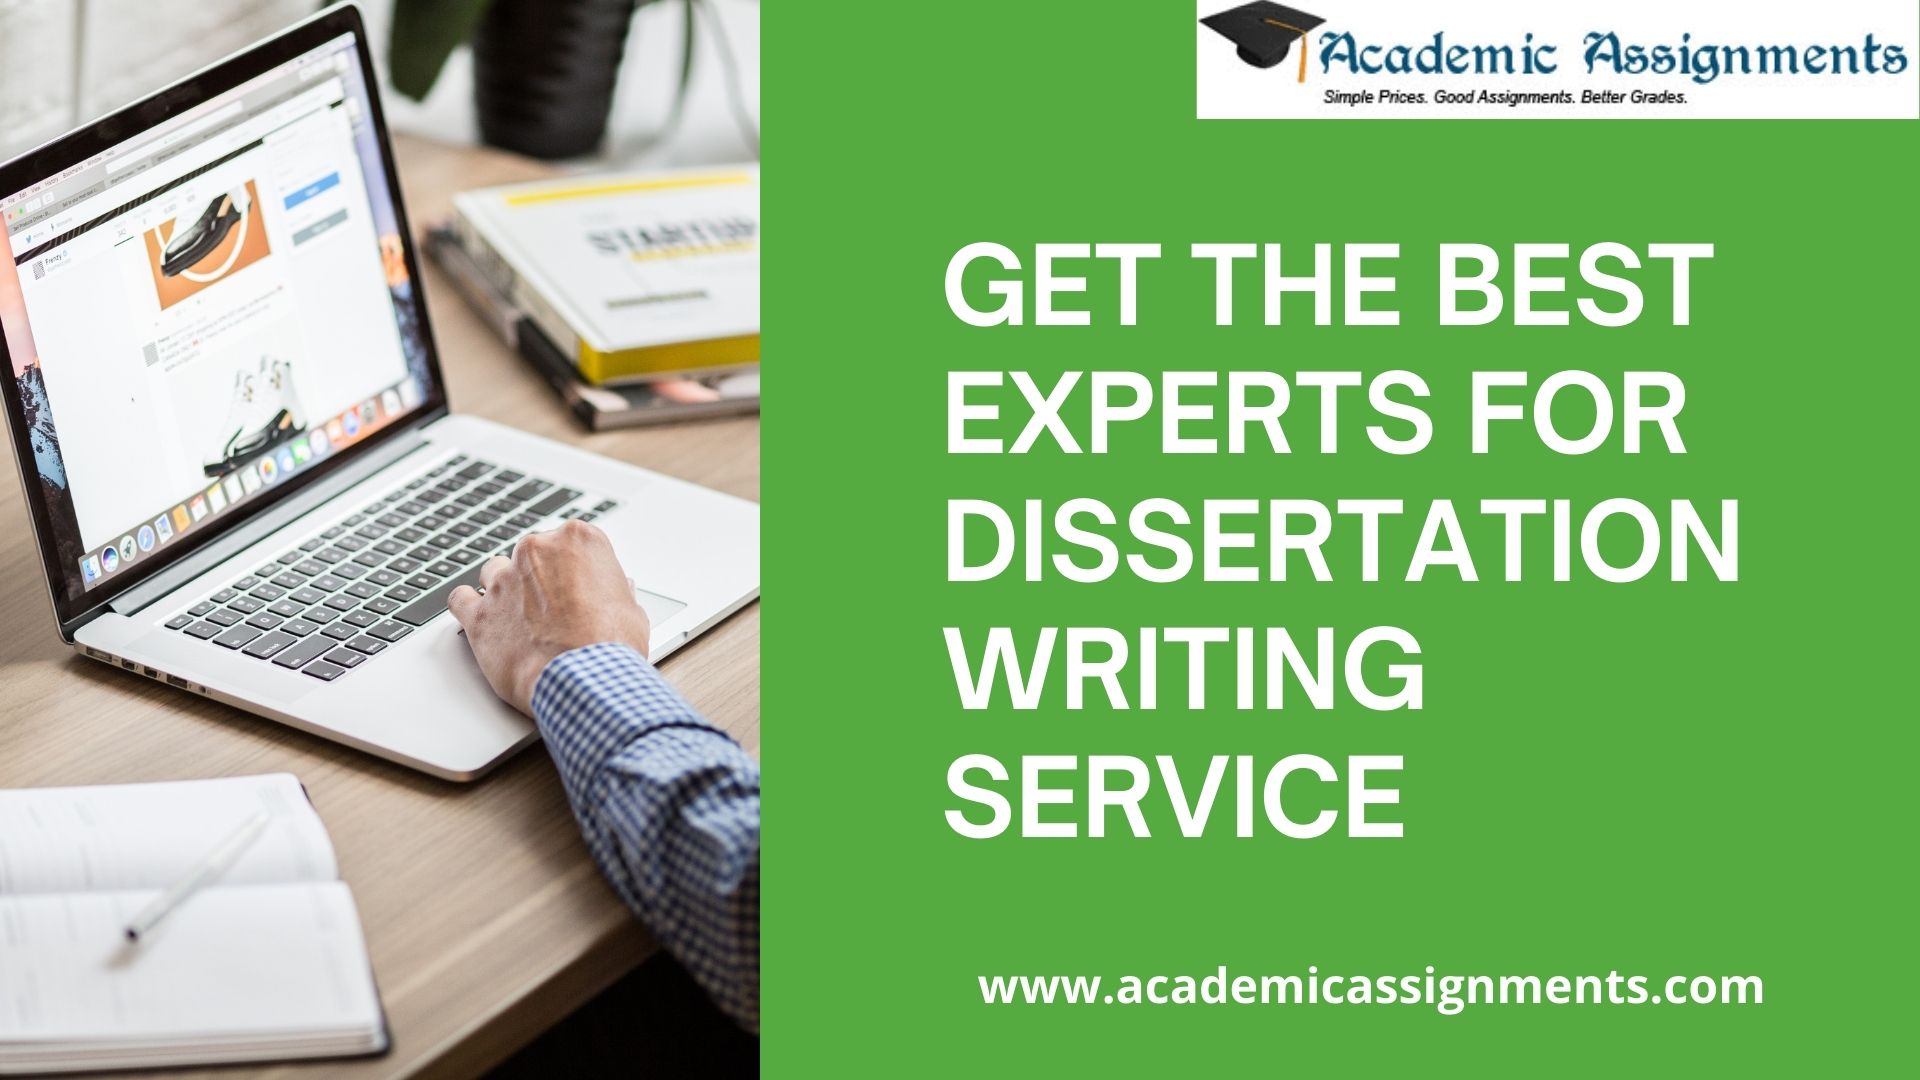 GET THE BEST EXPERTS FOR DISSERTATION WRITING SERVICE